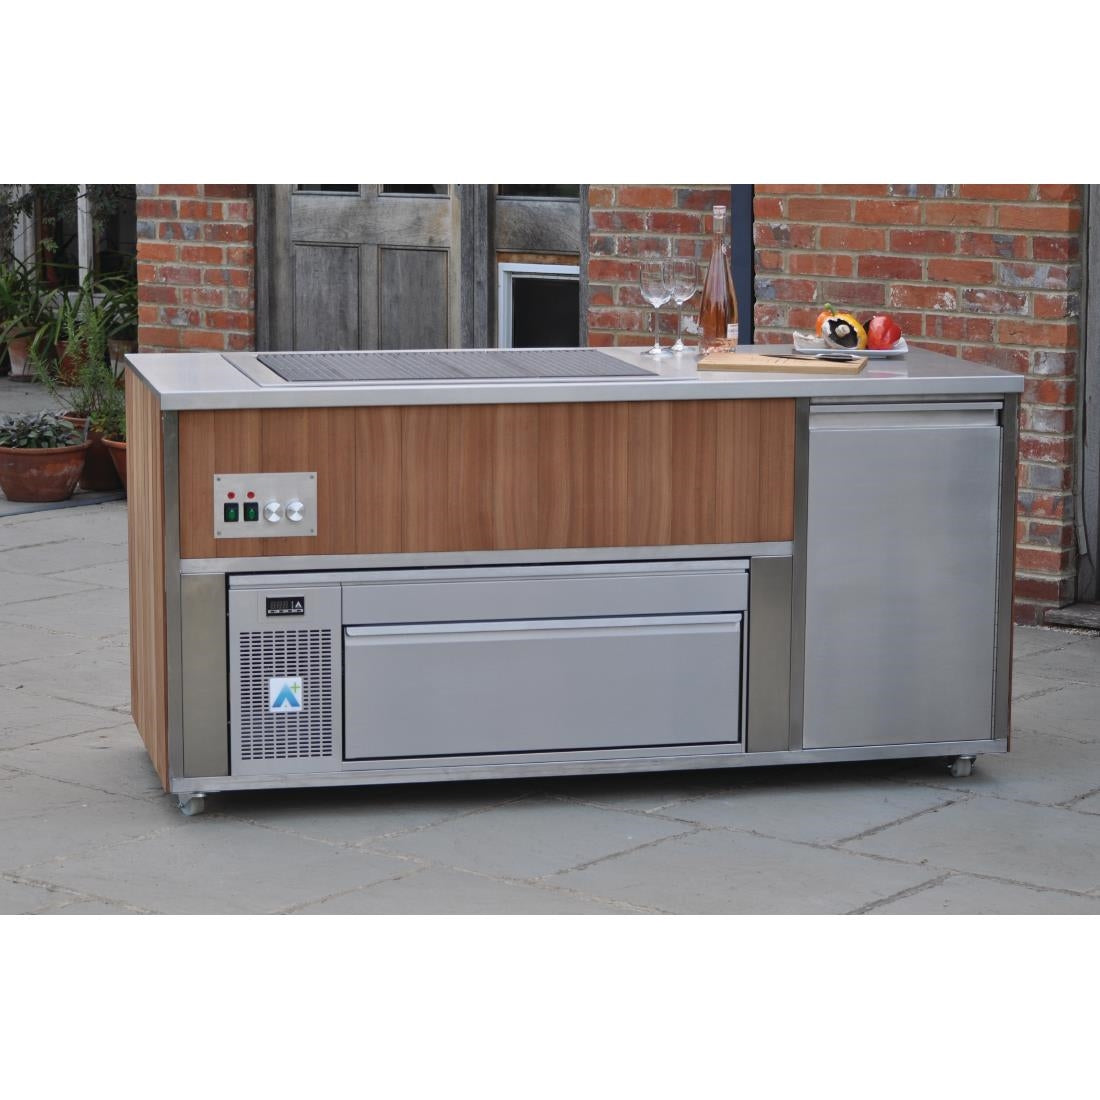 FP451 Synergy Grill Outdoor Cook Station 900 with Adande Drawer Fridge